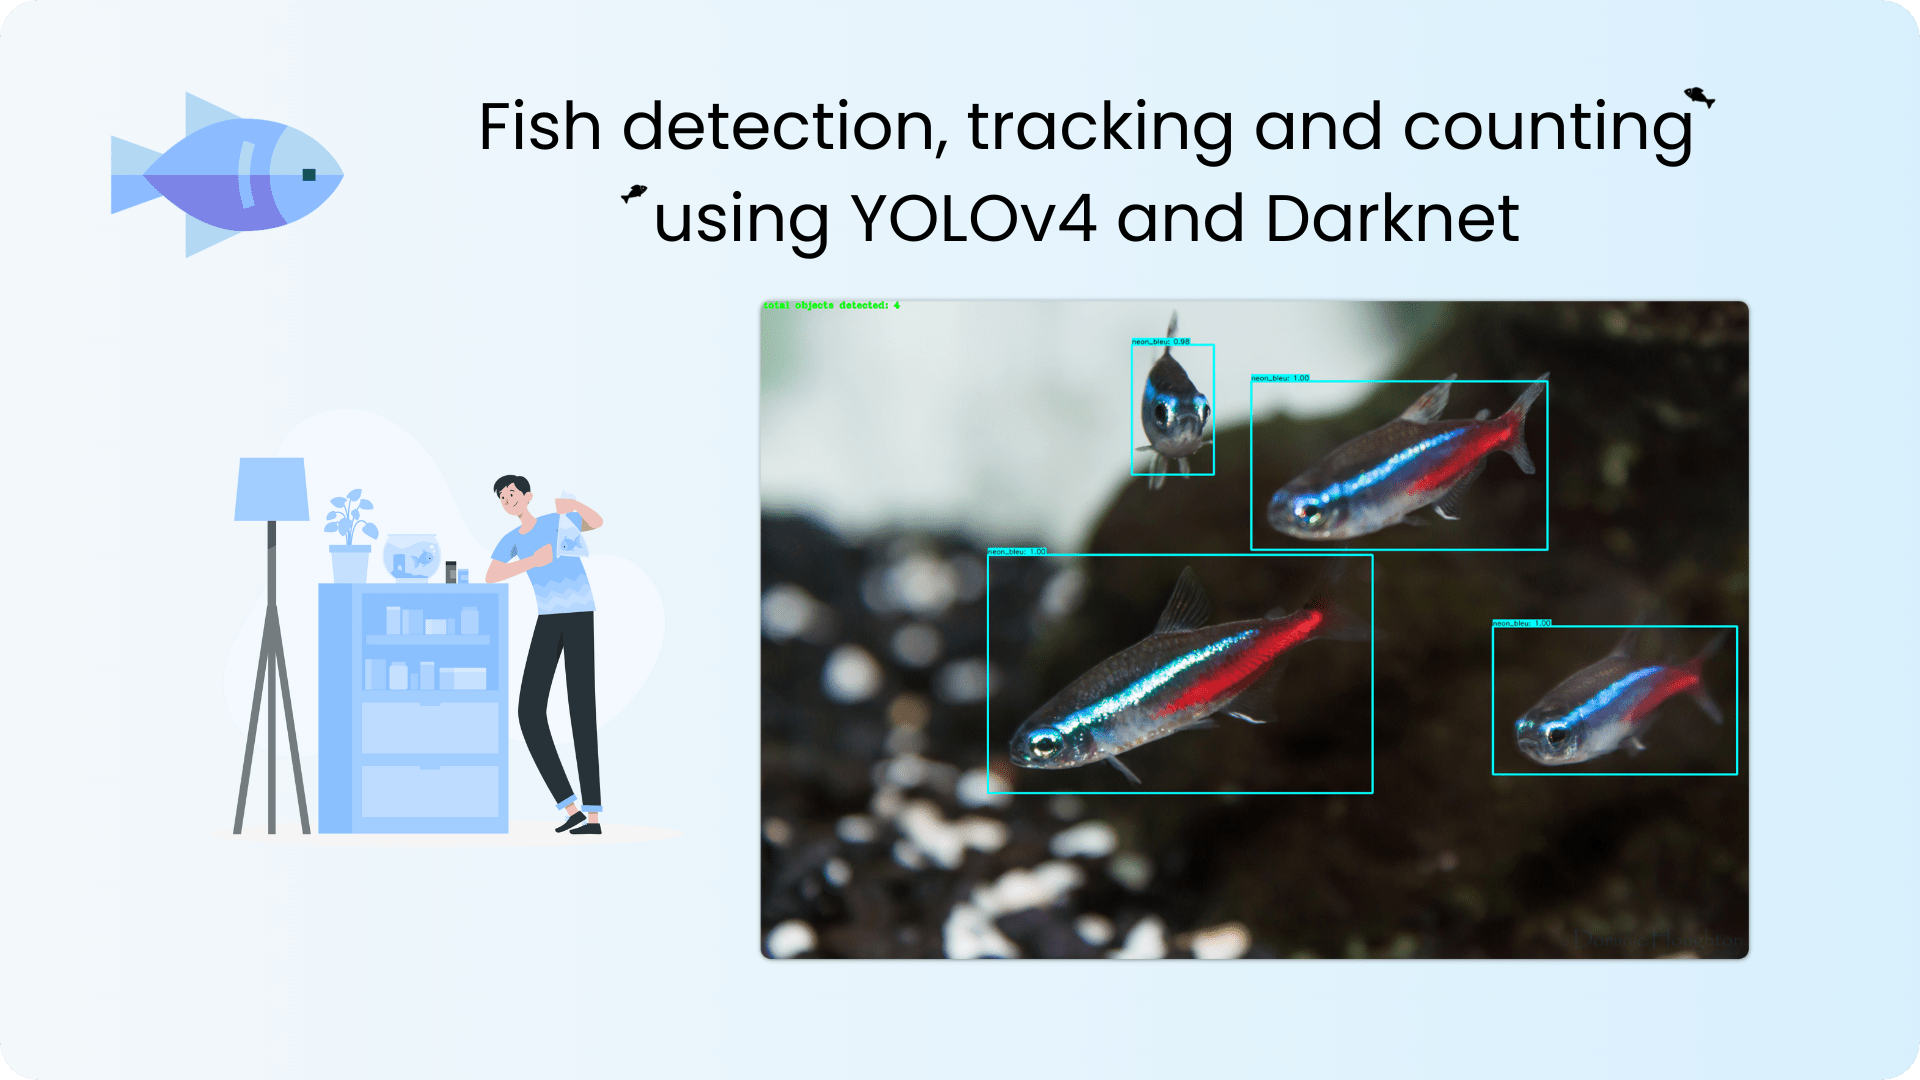 Fish Detector project's image